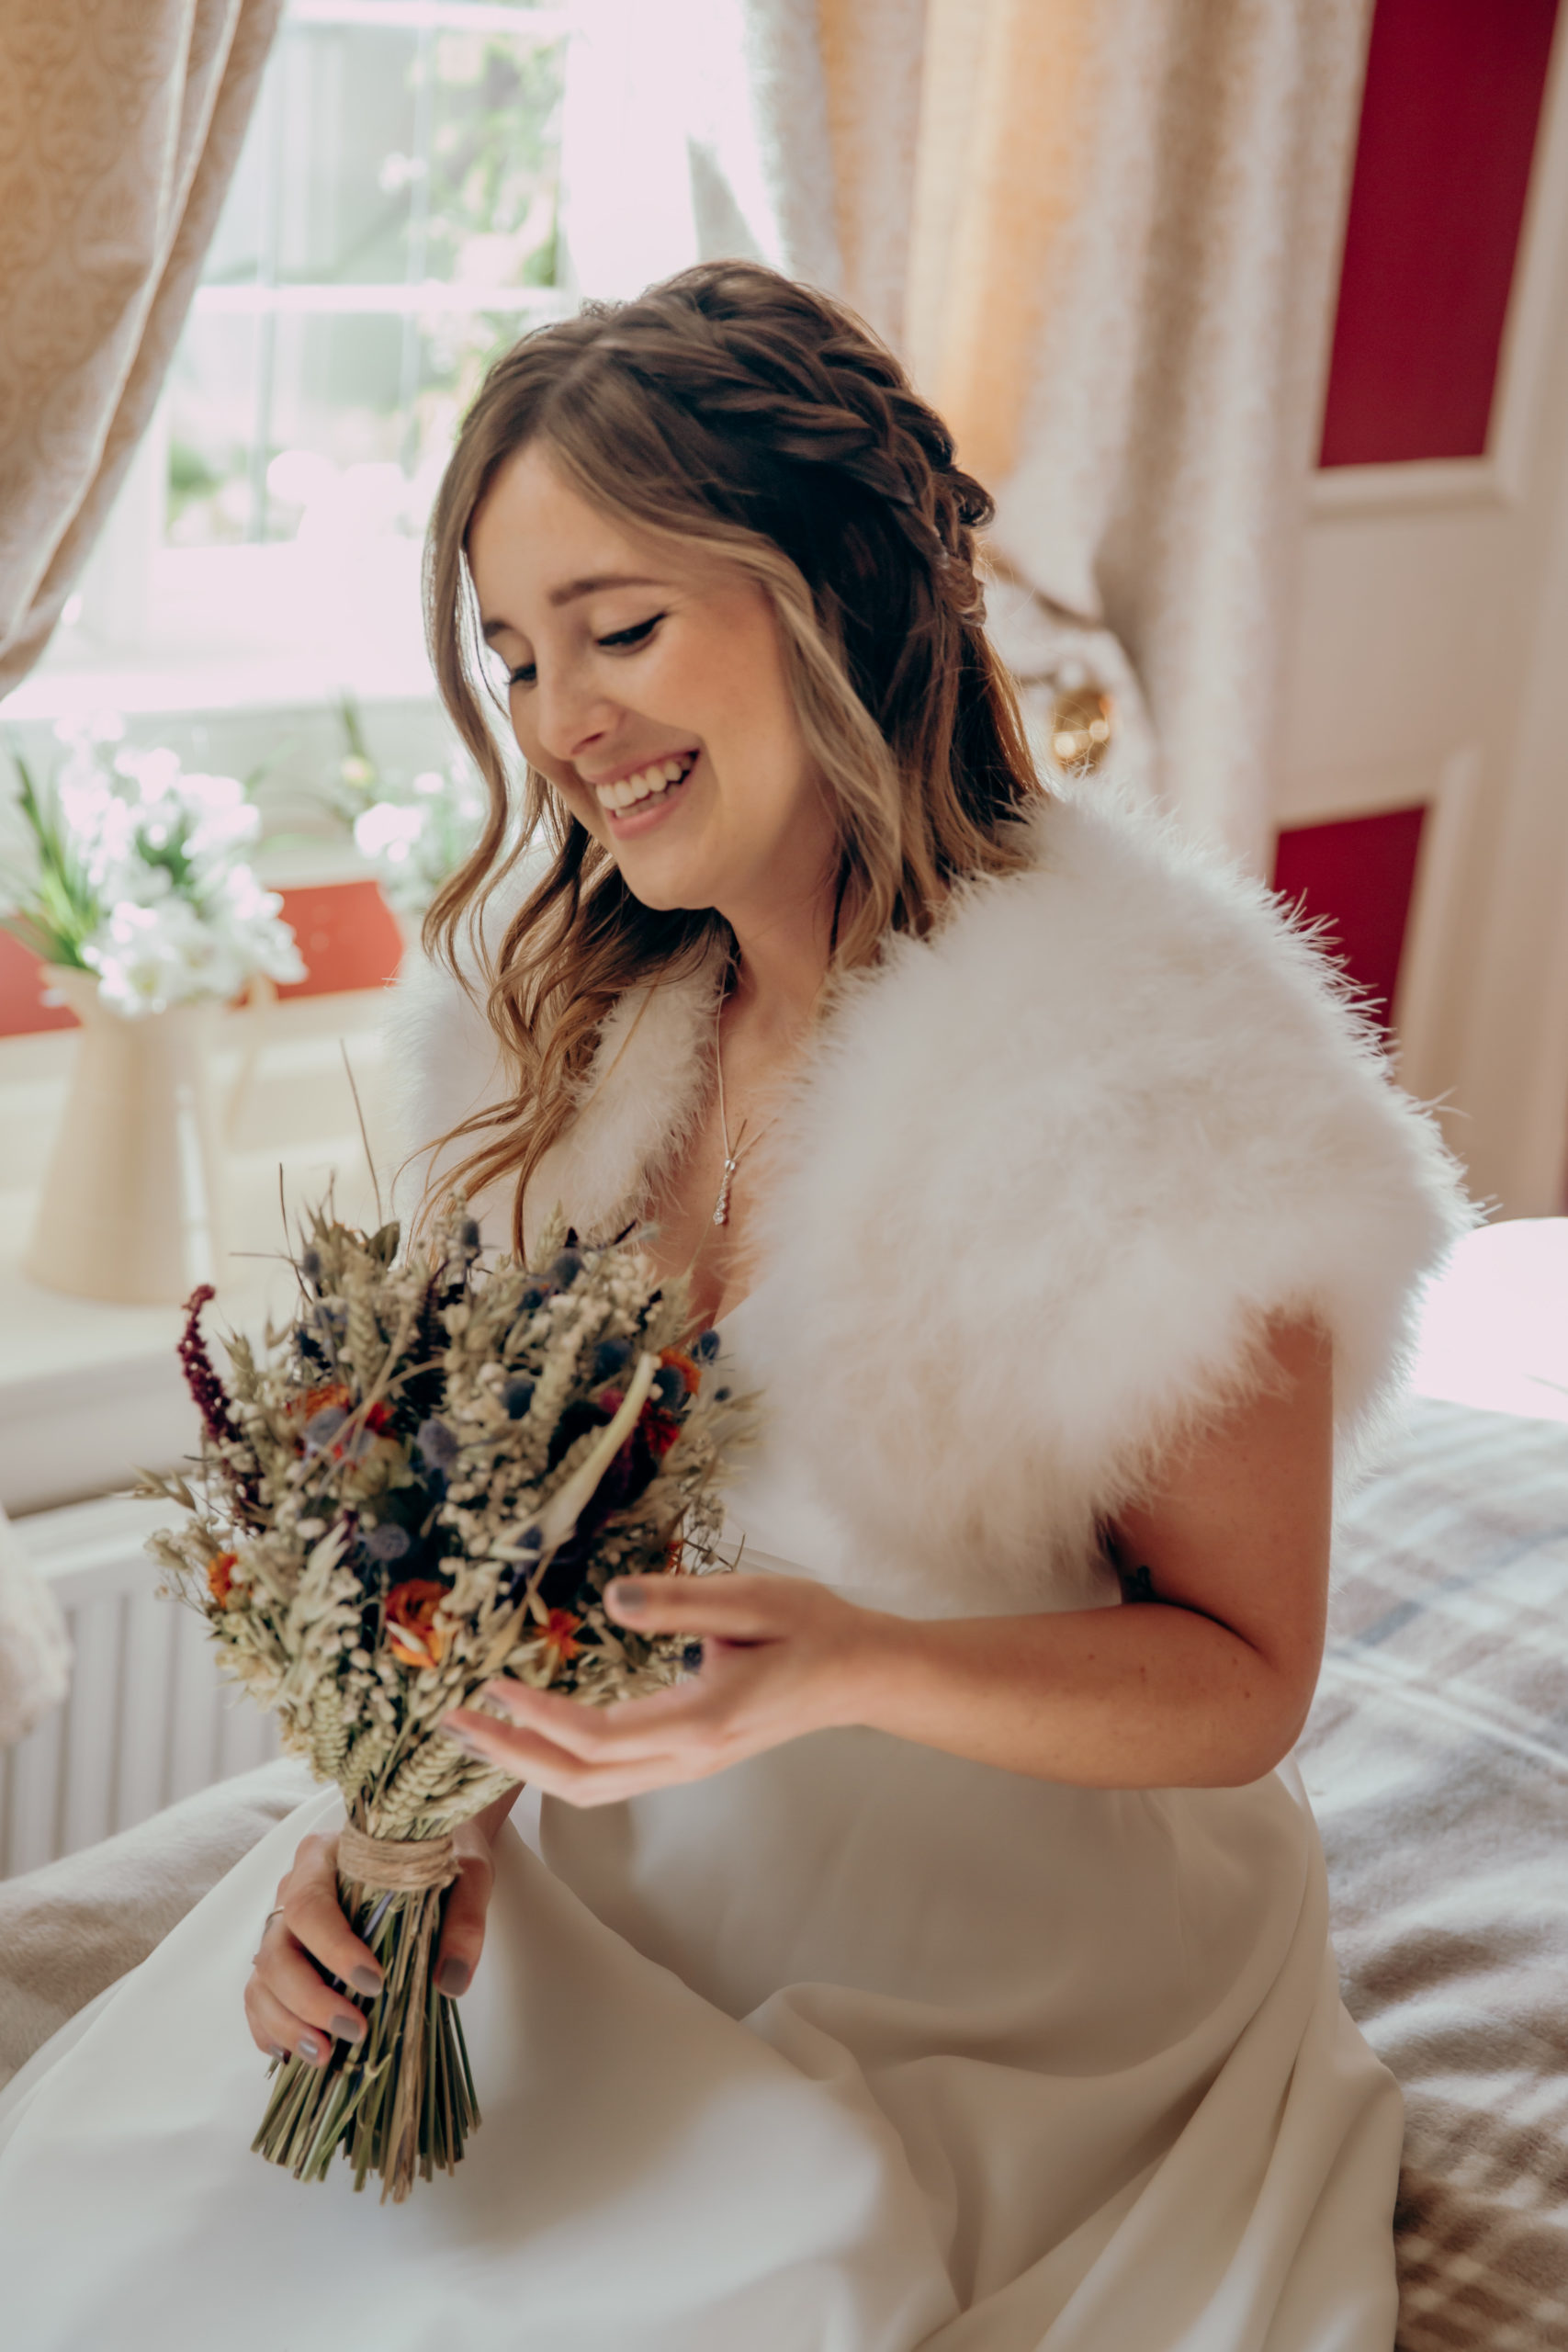 Lisa sits in her room as she finishes getting ready, laughing and holding her bouquet